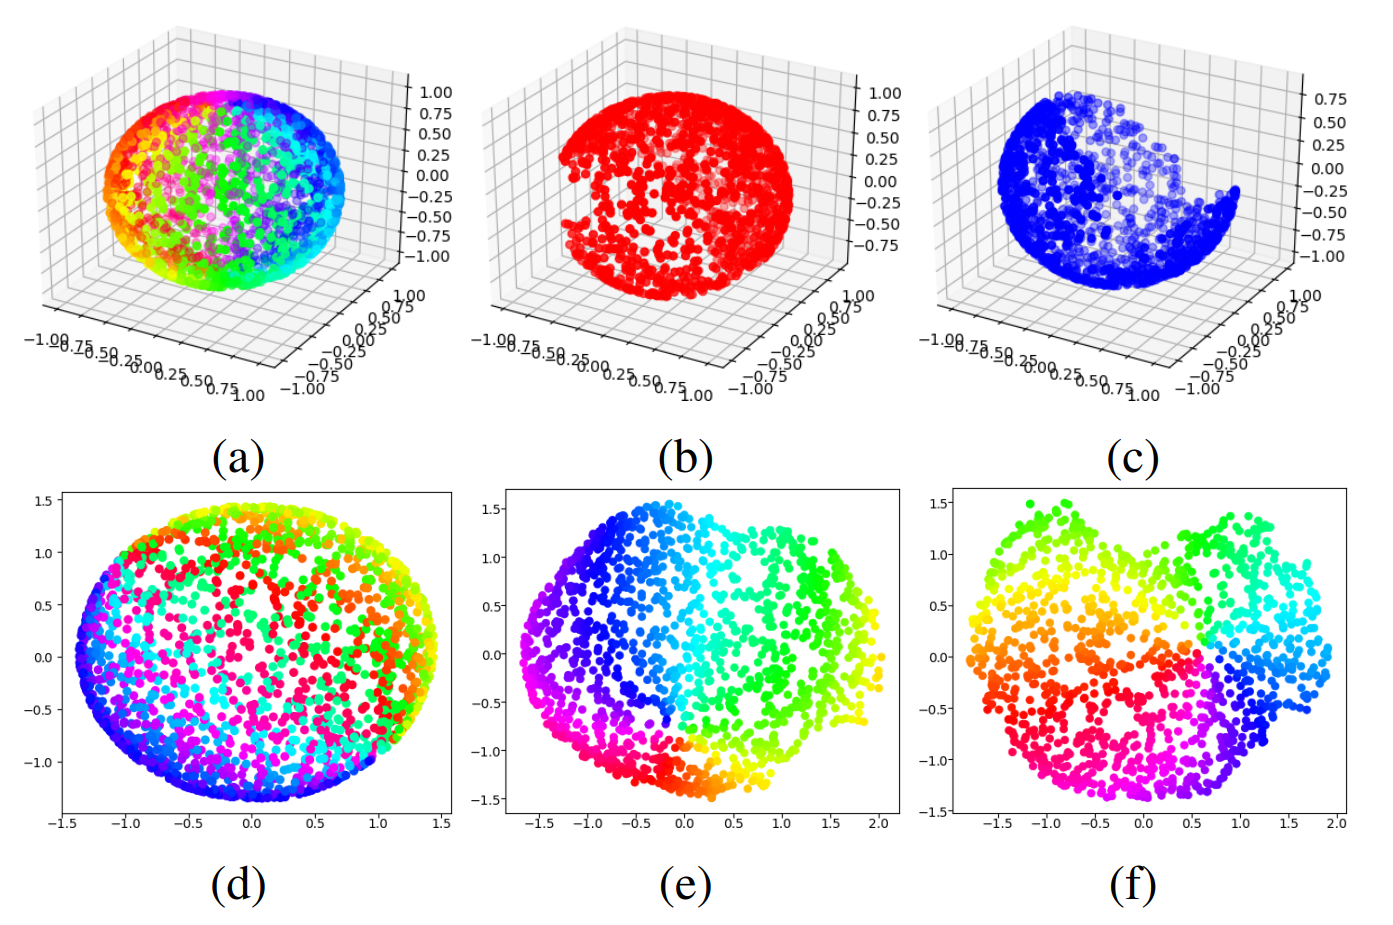 Charts for a sphere. (a) is the original sphere, (b) and (c) are charts, (d) is an ISOMAP embedding of (a), (e) and (f) are respective ISOMAP embeddings of (b) and (c).